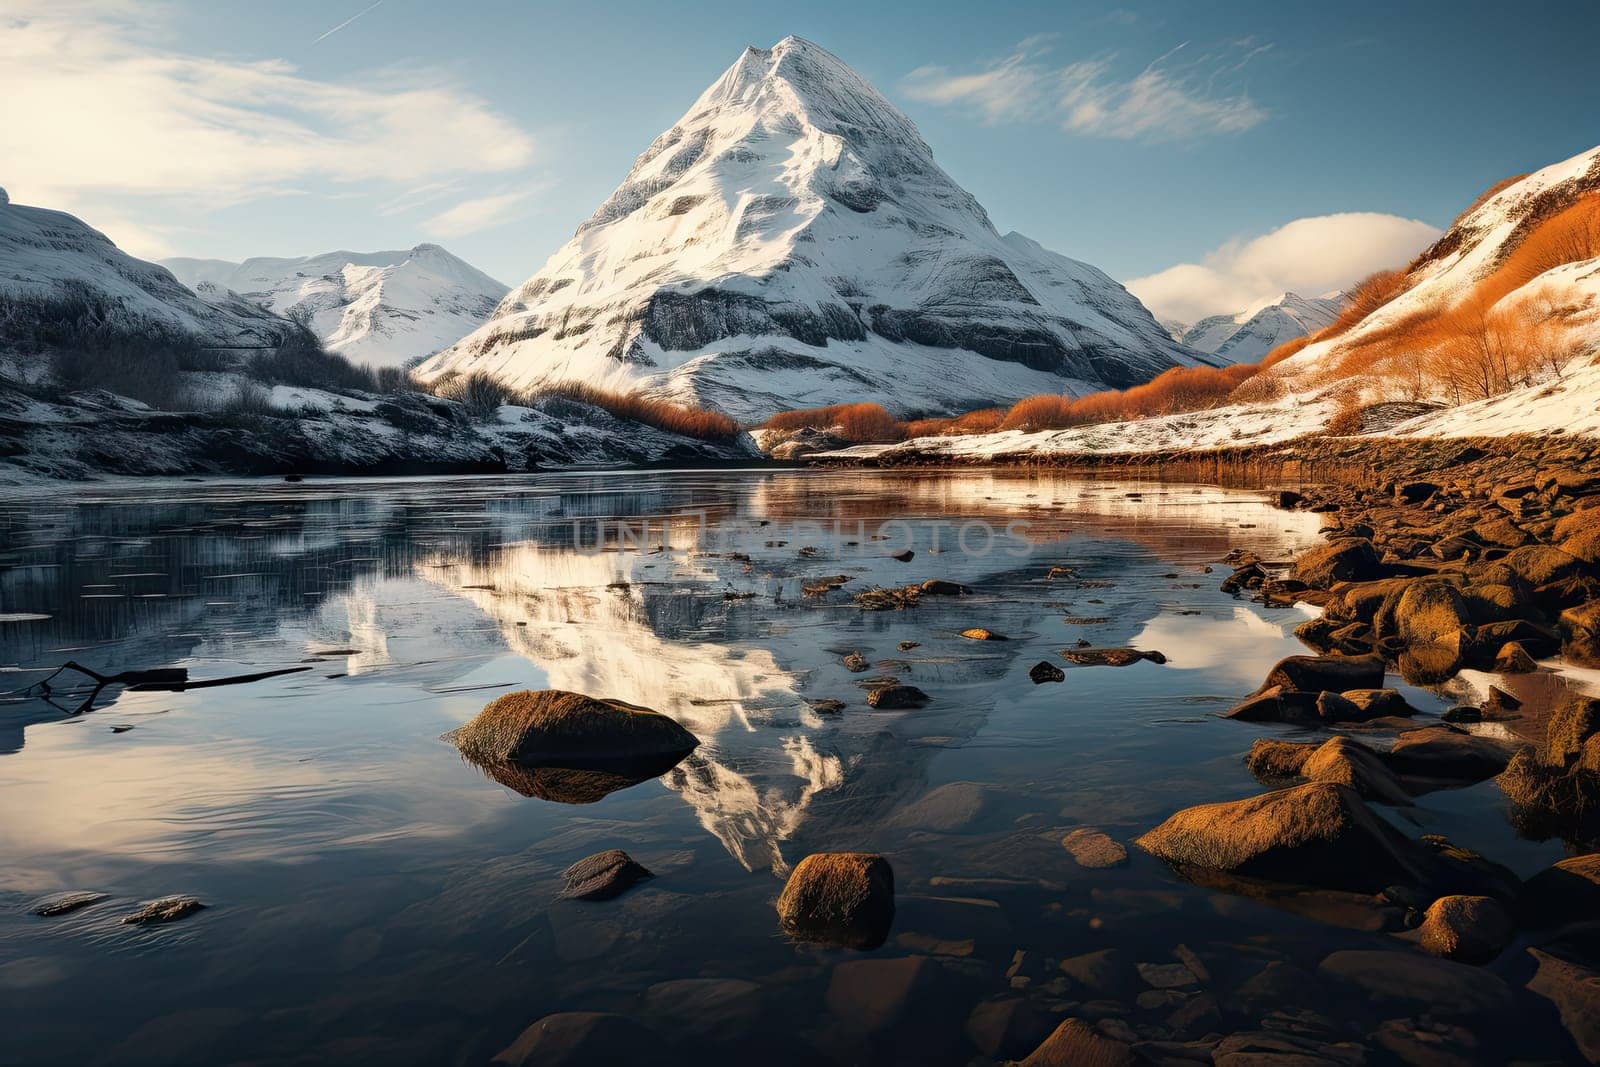 A Majestic Snow-Covered Mountain Reflecting in a Tranquil Body of Water